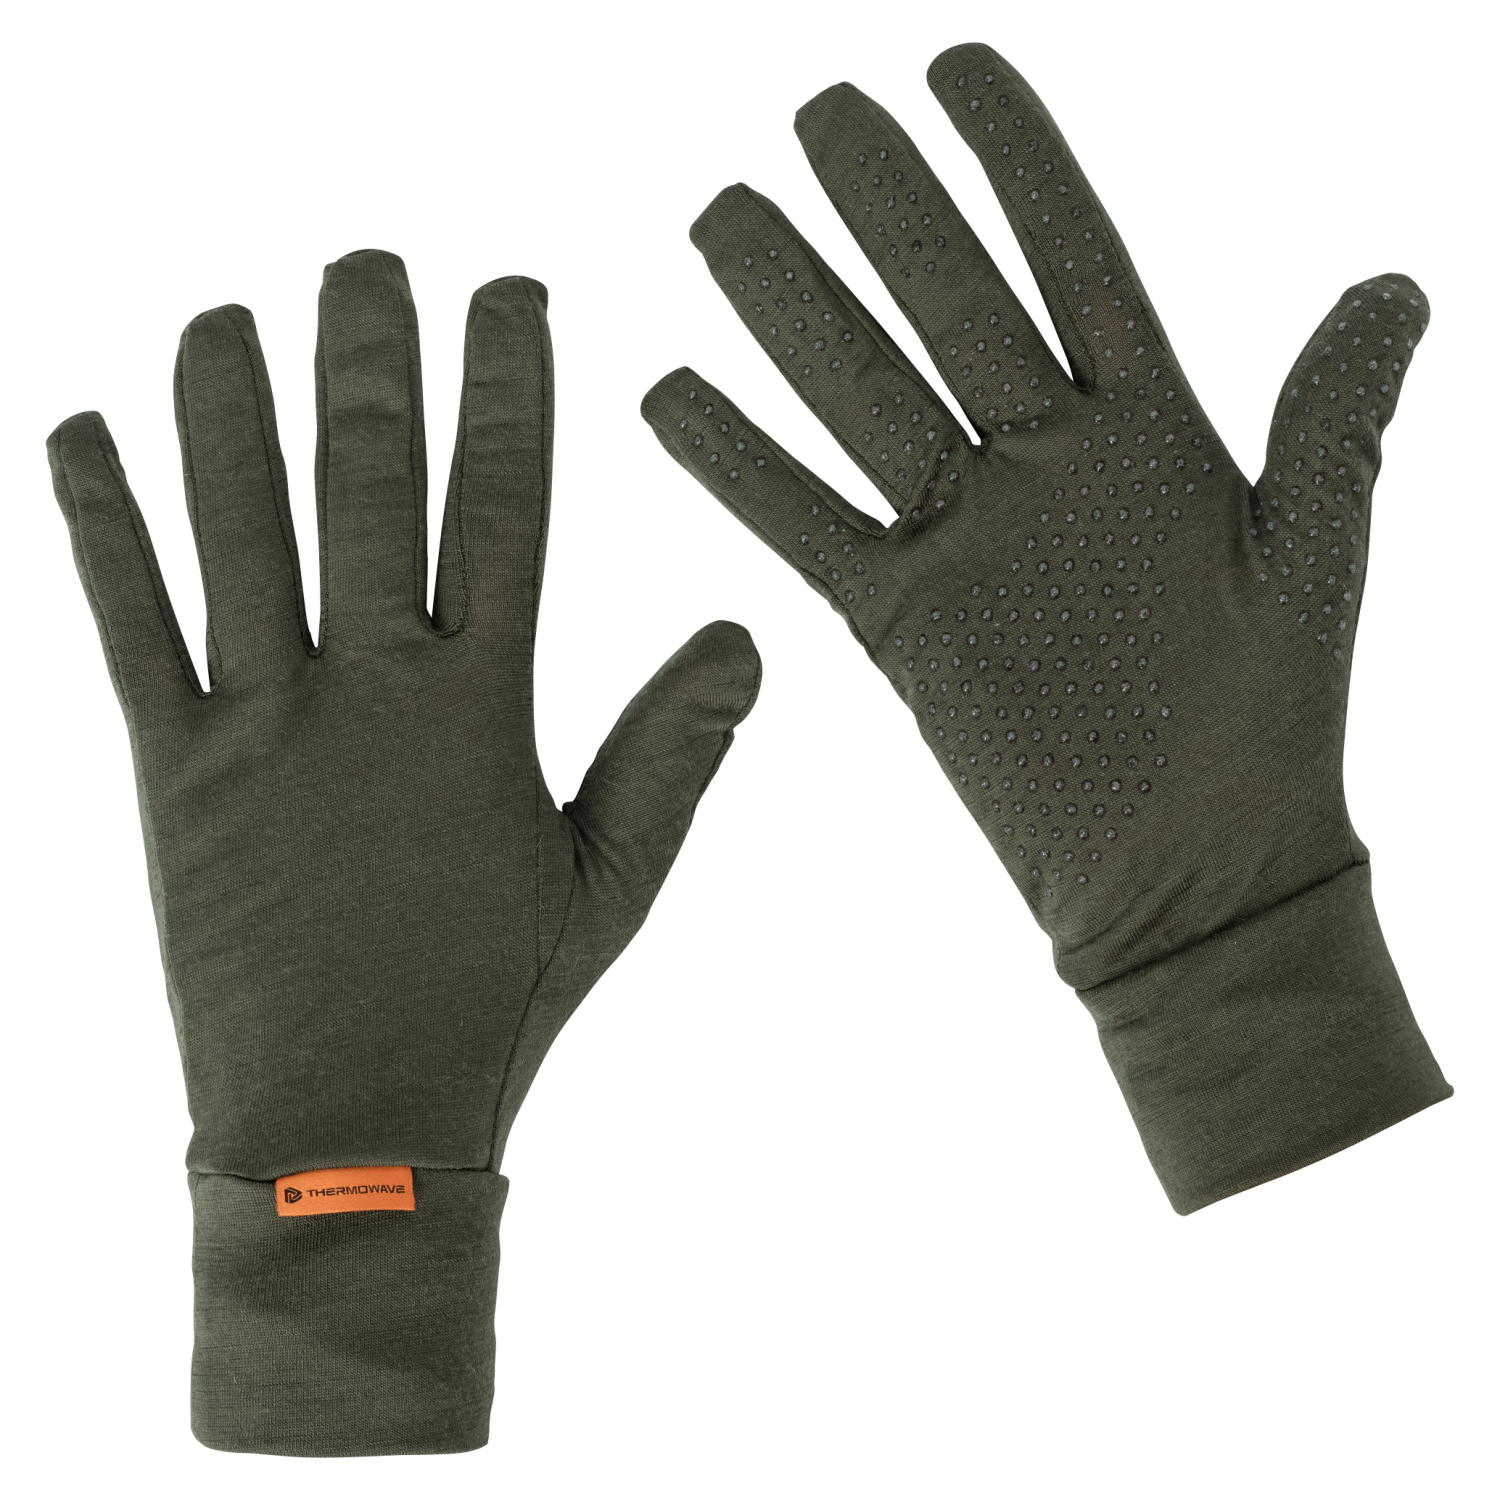 Thermowave Mens Gloves at low prices